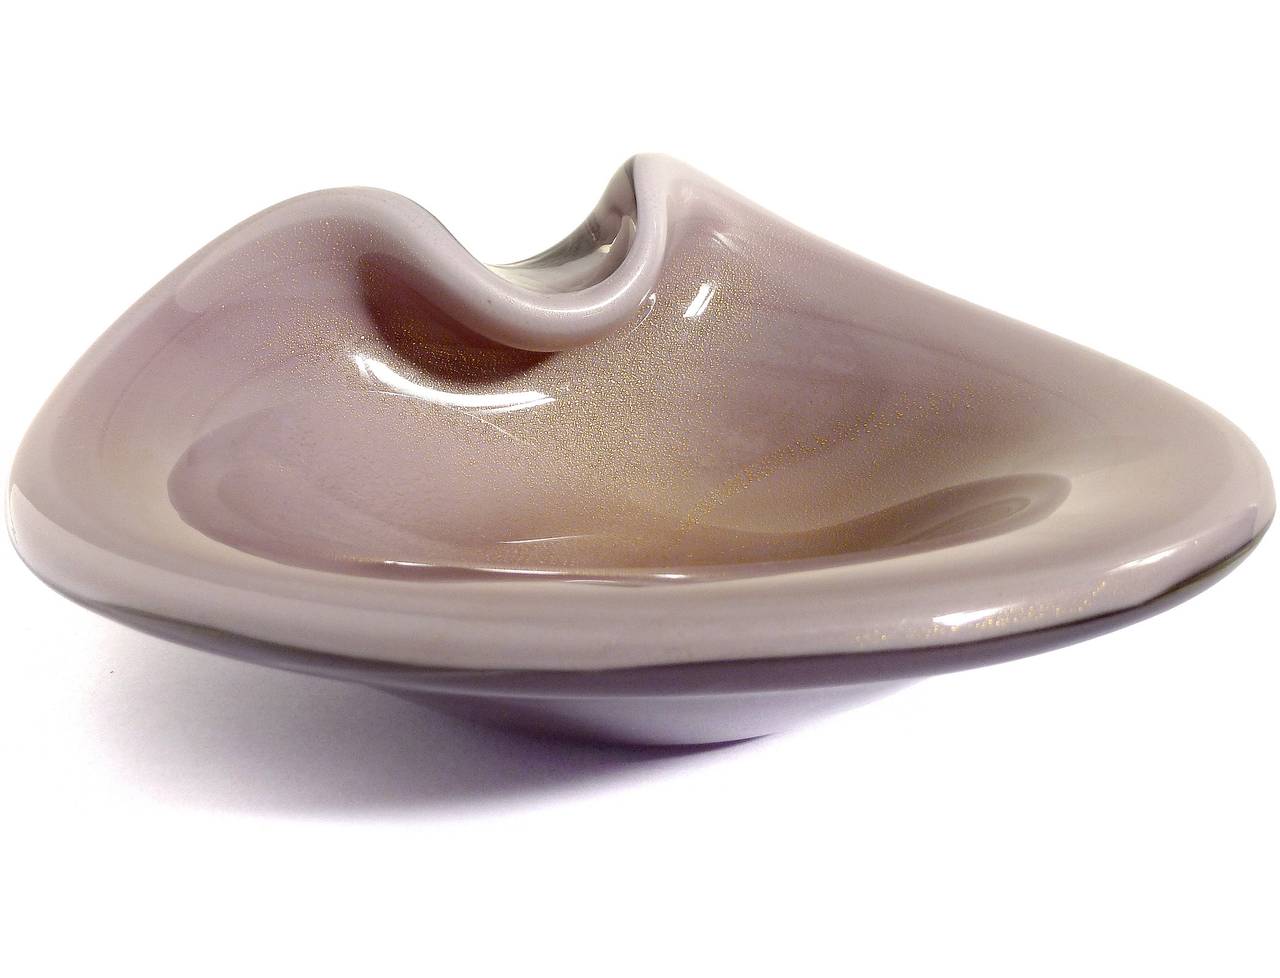 FREE Shipping Worldwide! See details below description.

Beautiful Murano Hand Blown Lavender Purple and Gold Flecks Art Glass Bowl or Jewelry Dish. Attributed to designer Alfredo Barbini. The piece has a flip top with indent and has a pedestal